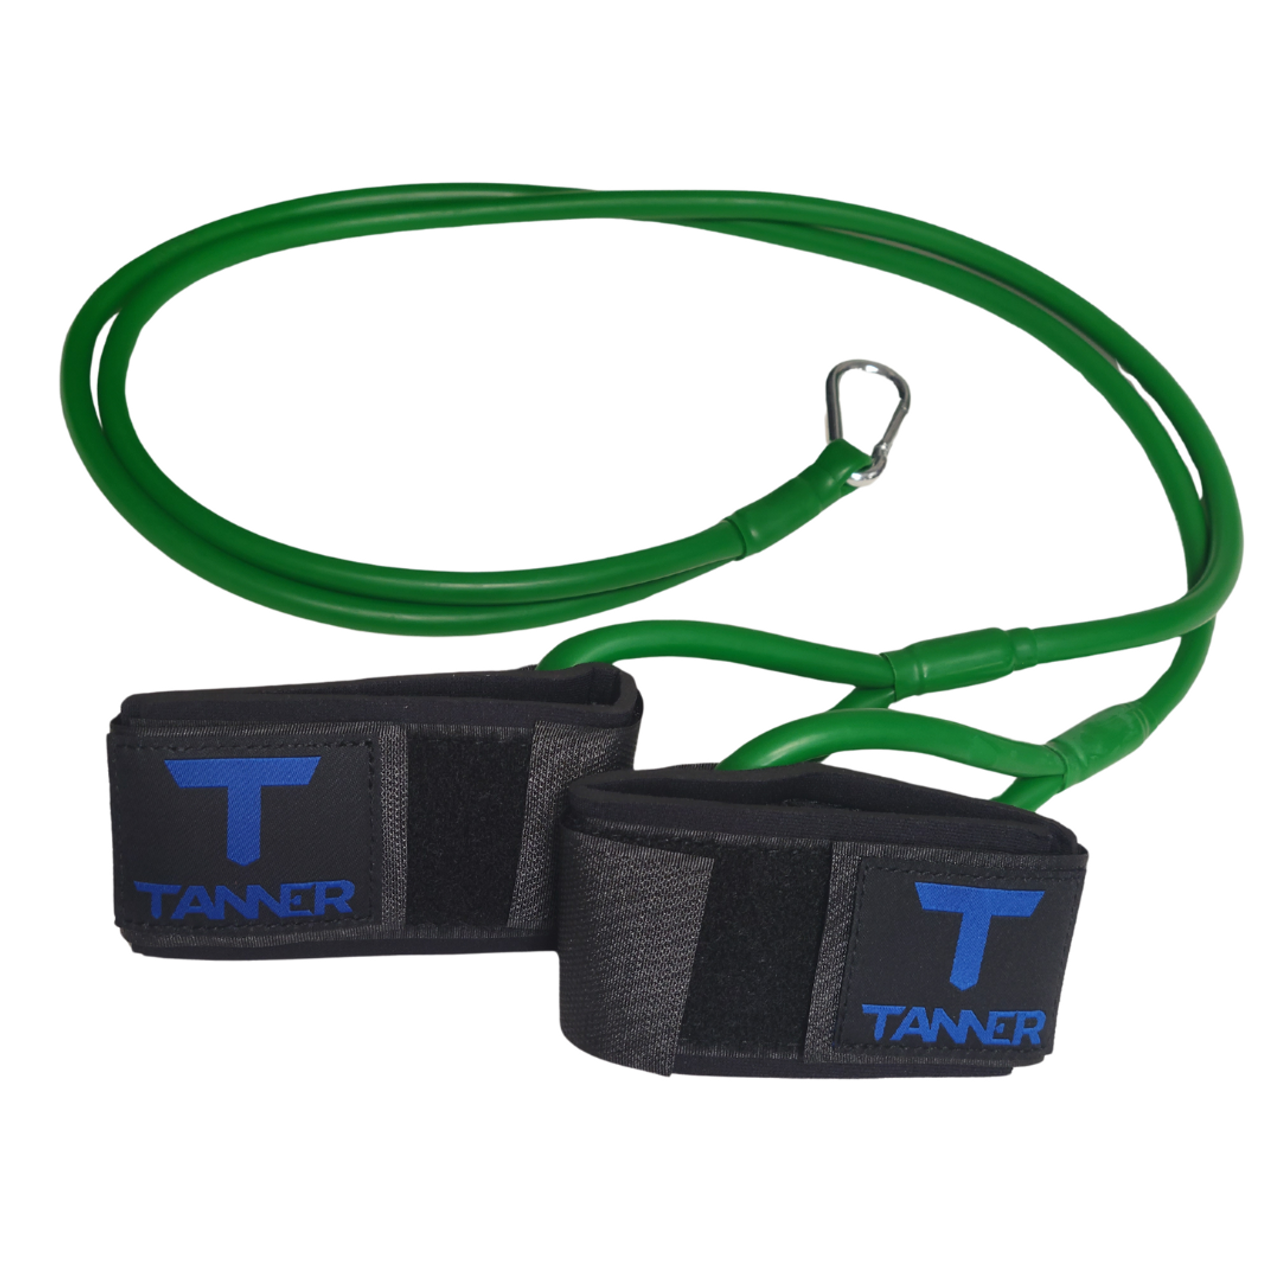 Resistance Training Tips: Choosing the Best Resistance Band